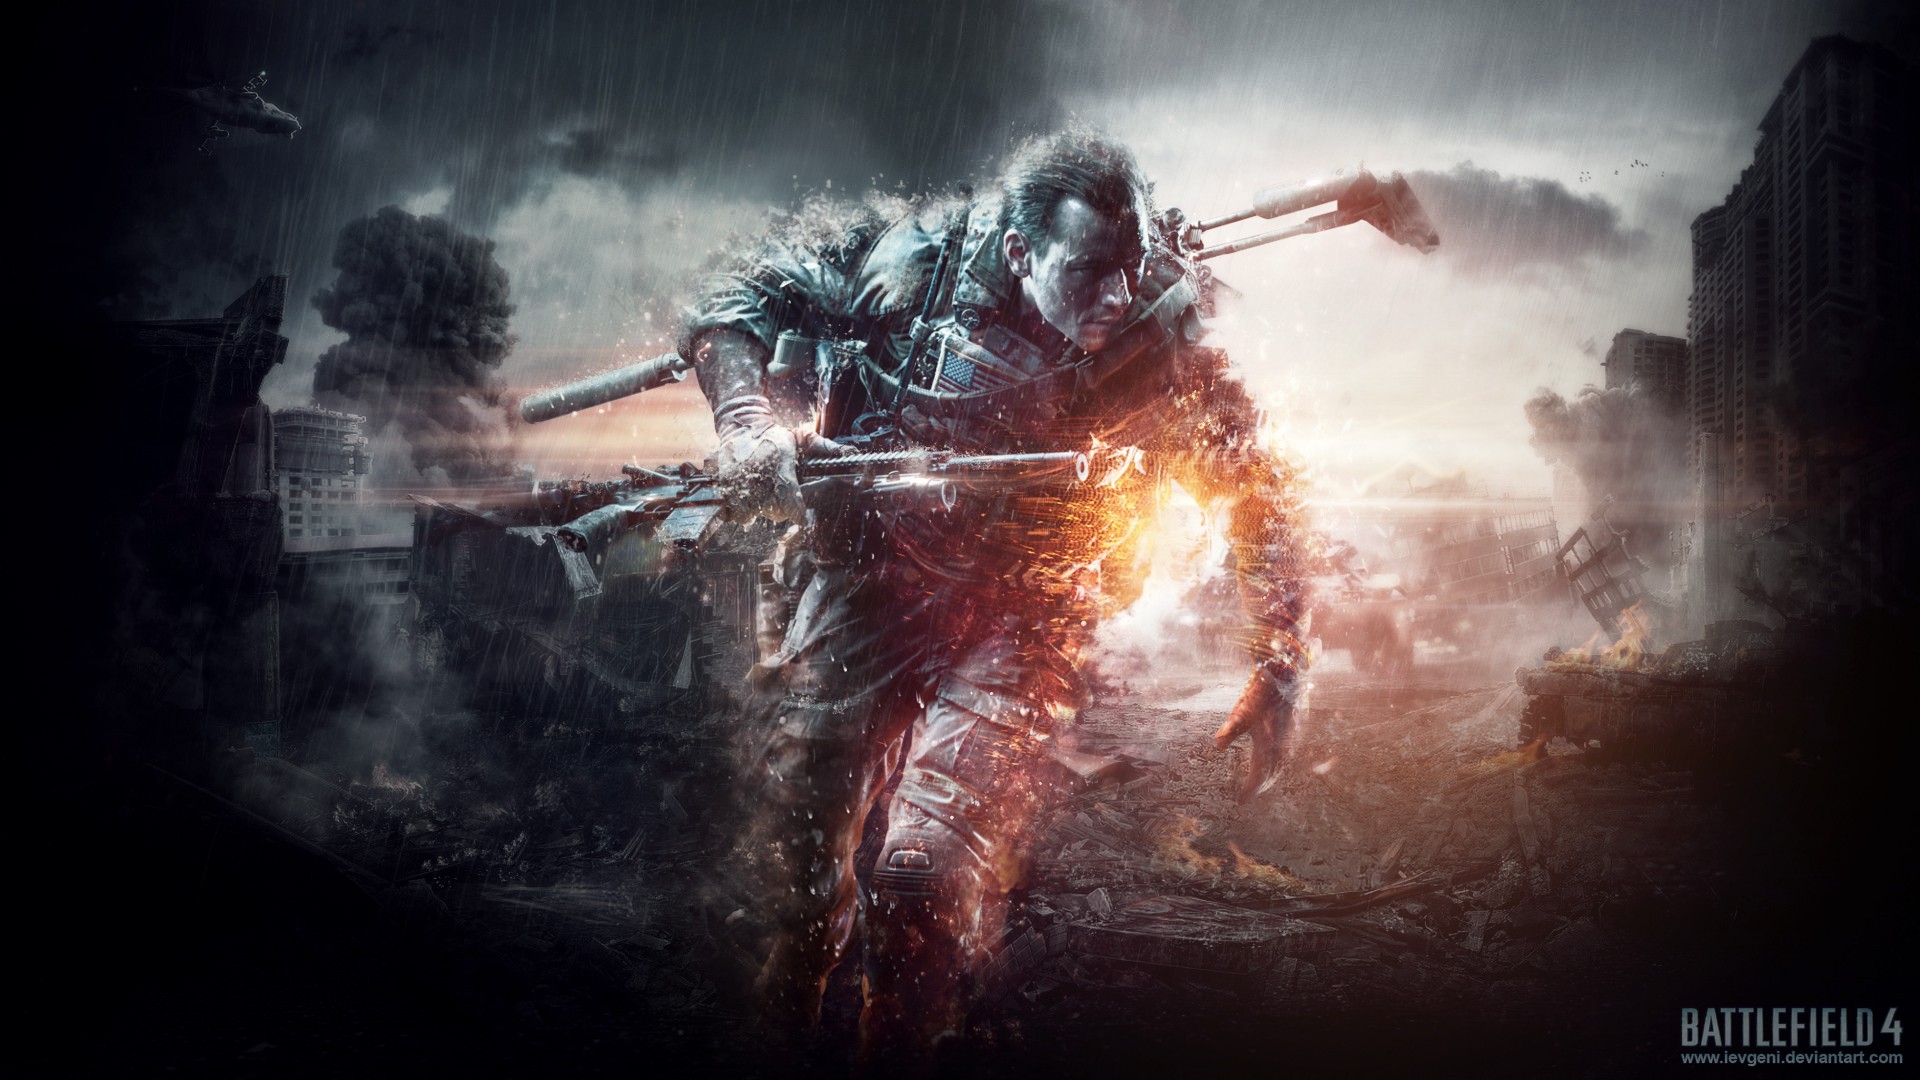 General 1920x1080 Battlefield 4 video games video game art soldier 2013 (Year) PC gaming video game men